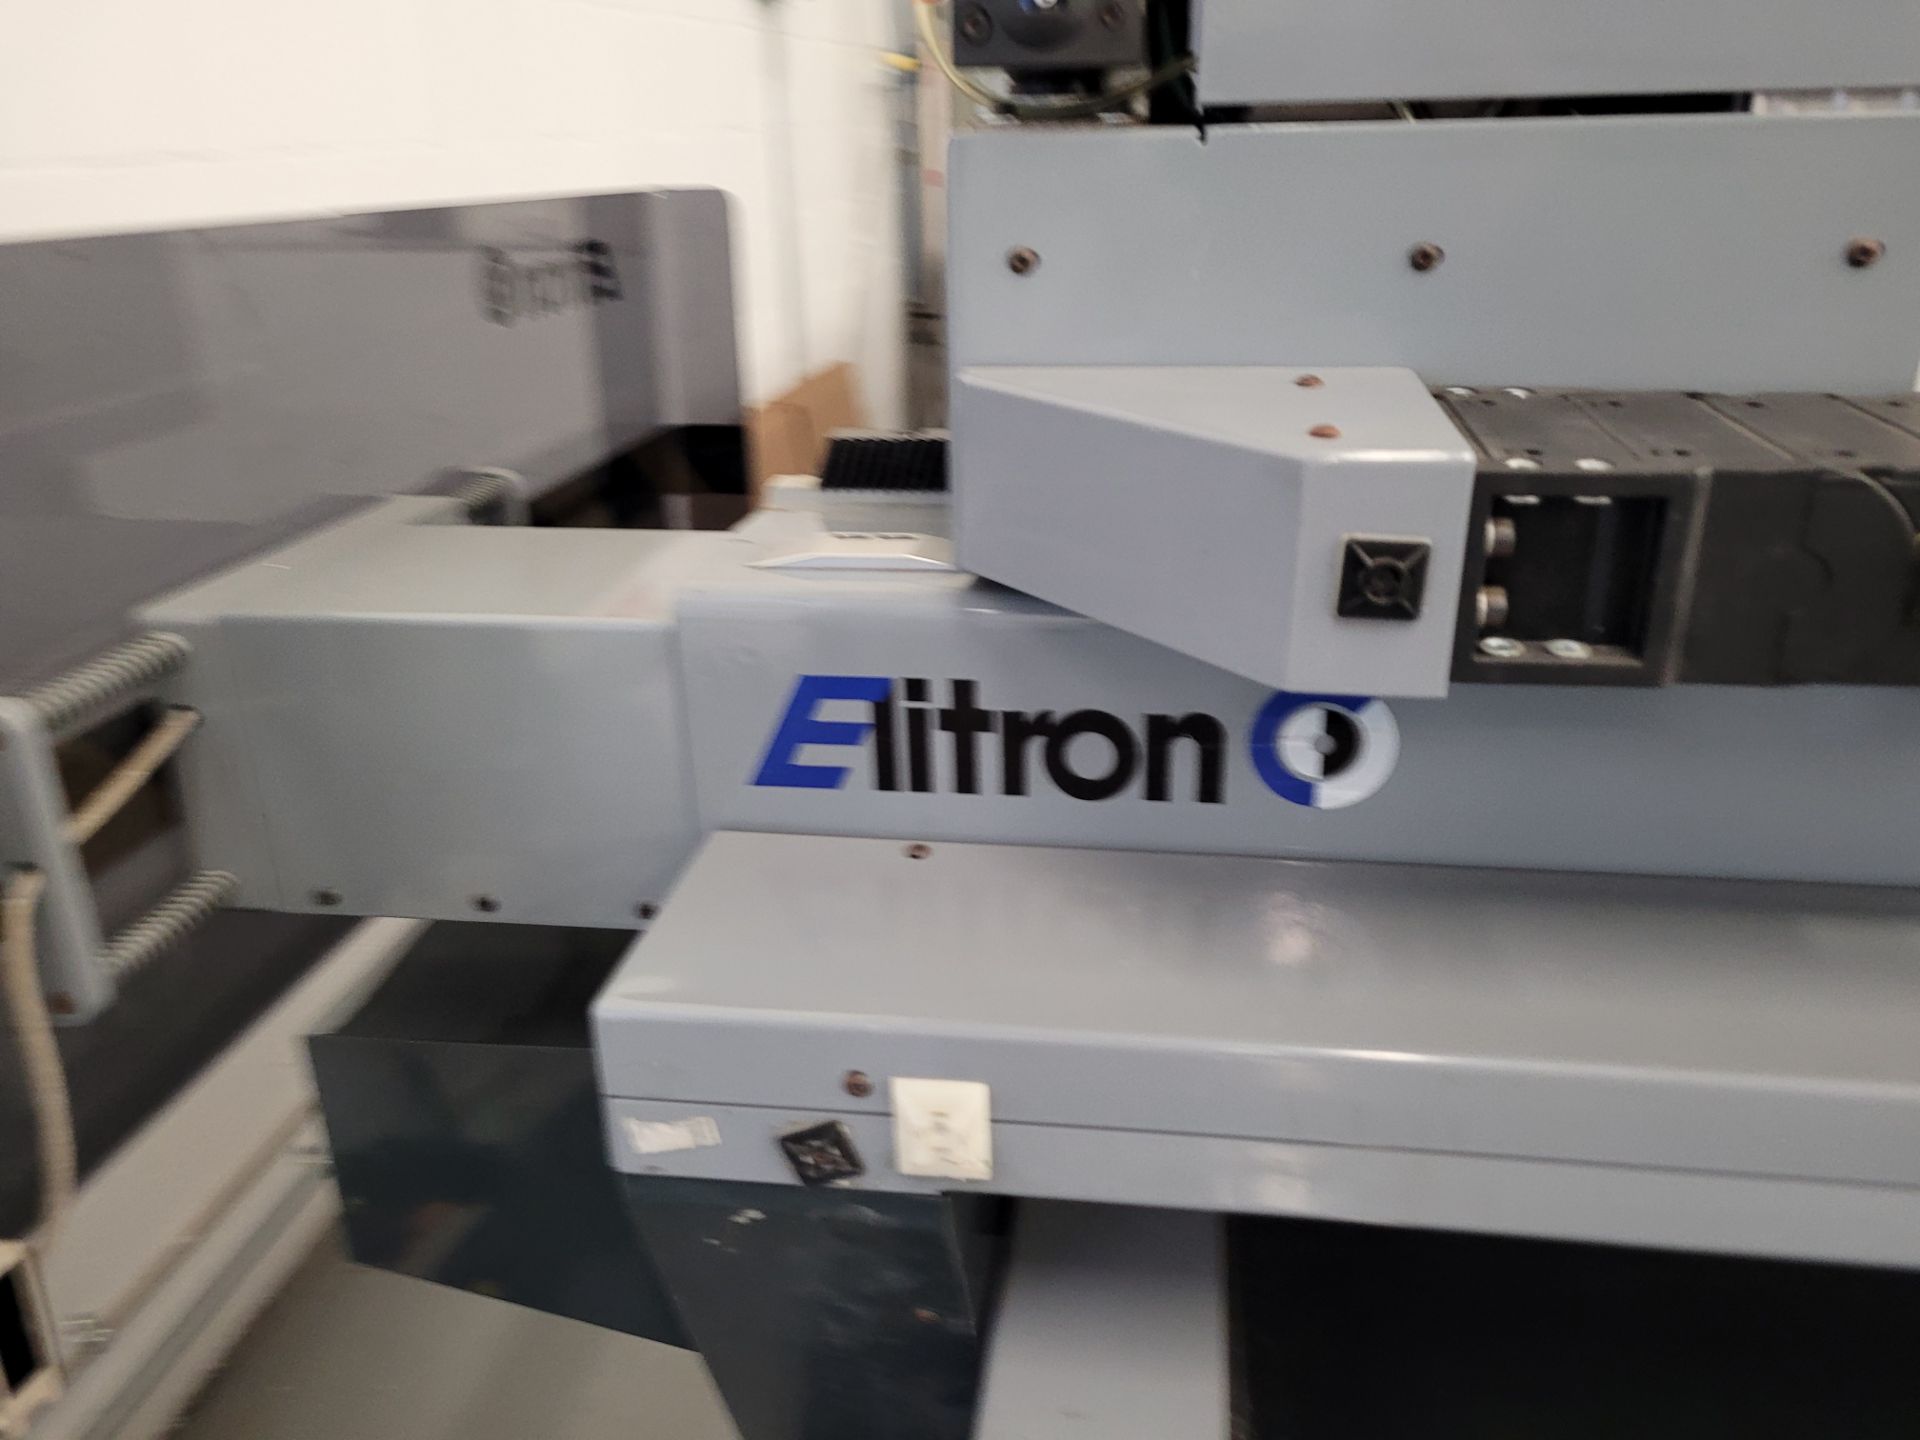 2014 ELITRON CAM mod. Kombo 3120 SD Automatic Cutting System, ser. 303141683G, 3PH, with air tank an - Image 8 of 46